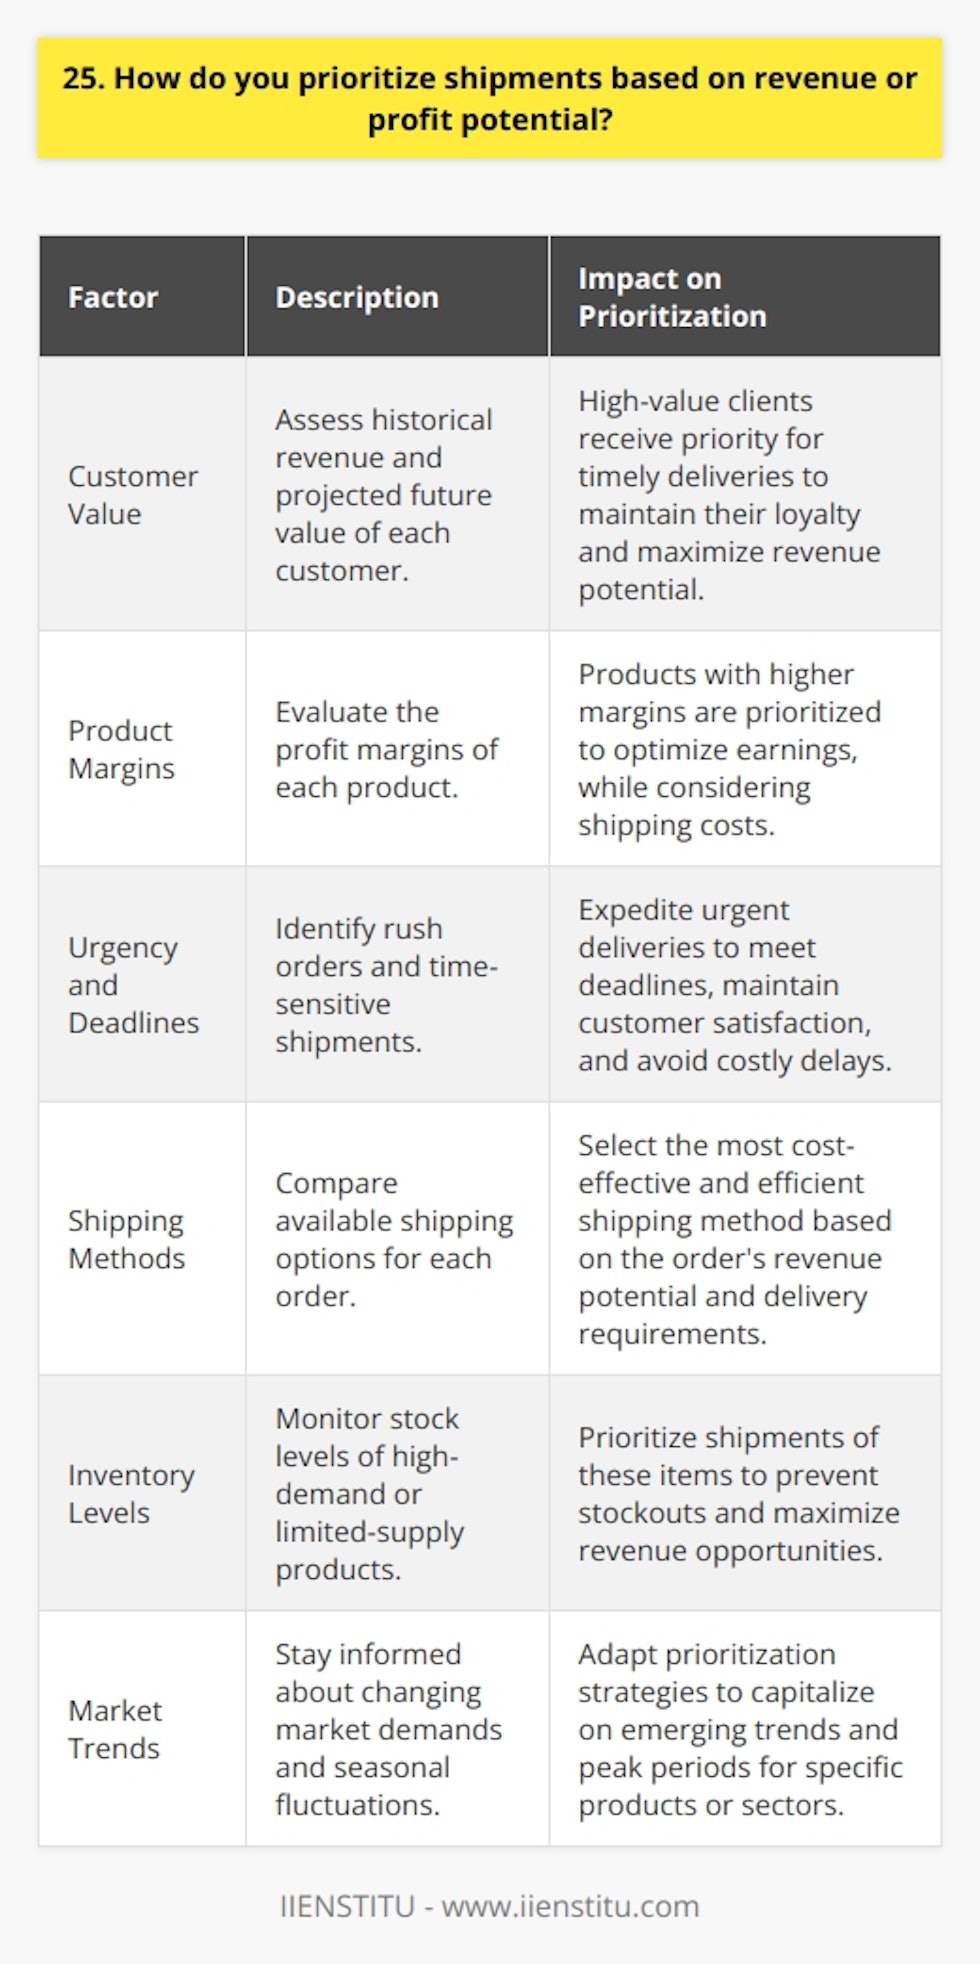 When prioritizing shipments based on revenue or profit potential, I consider several key factors: Analyze Customer Value I assess each customers historical revenue and projected future value. High-value clients take precedence for timely deliveries. Evaluate Product Margins Products with higher profit margins are prioritized to maximize the bottom line. I weigh potential earnings against shipping costs. Consider Urgency and Deadlines Rush orders and time-sensitive shipments are expedited to meet deadlines and maintain customer satisfaction. Avoiding delays is critical. Optimize Shipping Methods I compare shipping options to find the ideal balance of speed and cost-effectiveness for each orders revenue potential. Monitor Inventory Levels For products in high demand or limited supply, I prioritize shipments to avoid stockouts and missed revenue opportunities. Adapt to Market Trends I stay attentive to shifting market demands and adjust priorities to capitalize on emerging trends and seasonal spikes. Ultimately, effective prioritization requires a strategic blend of data analysis, urgency assessment, and revenue forecasting. By carefully evaluating these elements, I can optimize shipping workflows to drive profitability and customer loyalty.